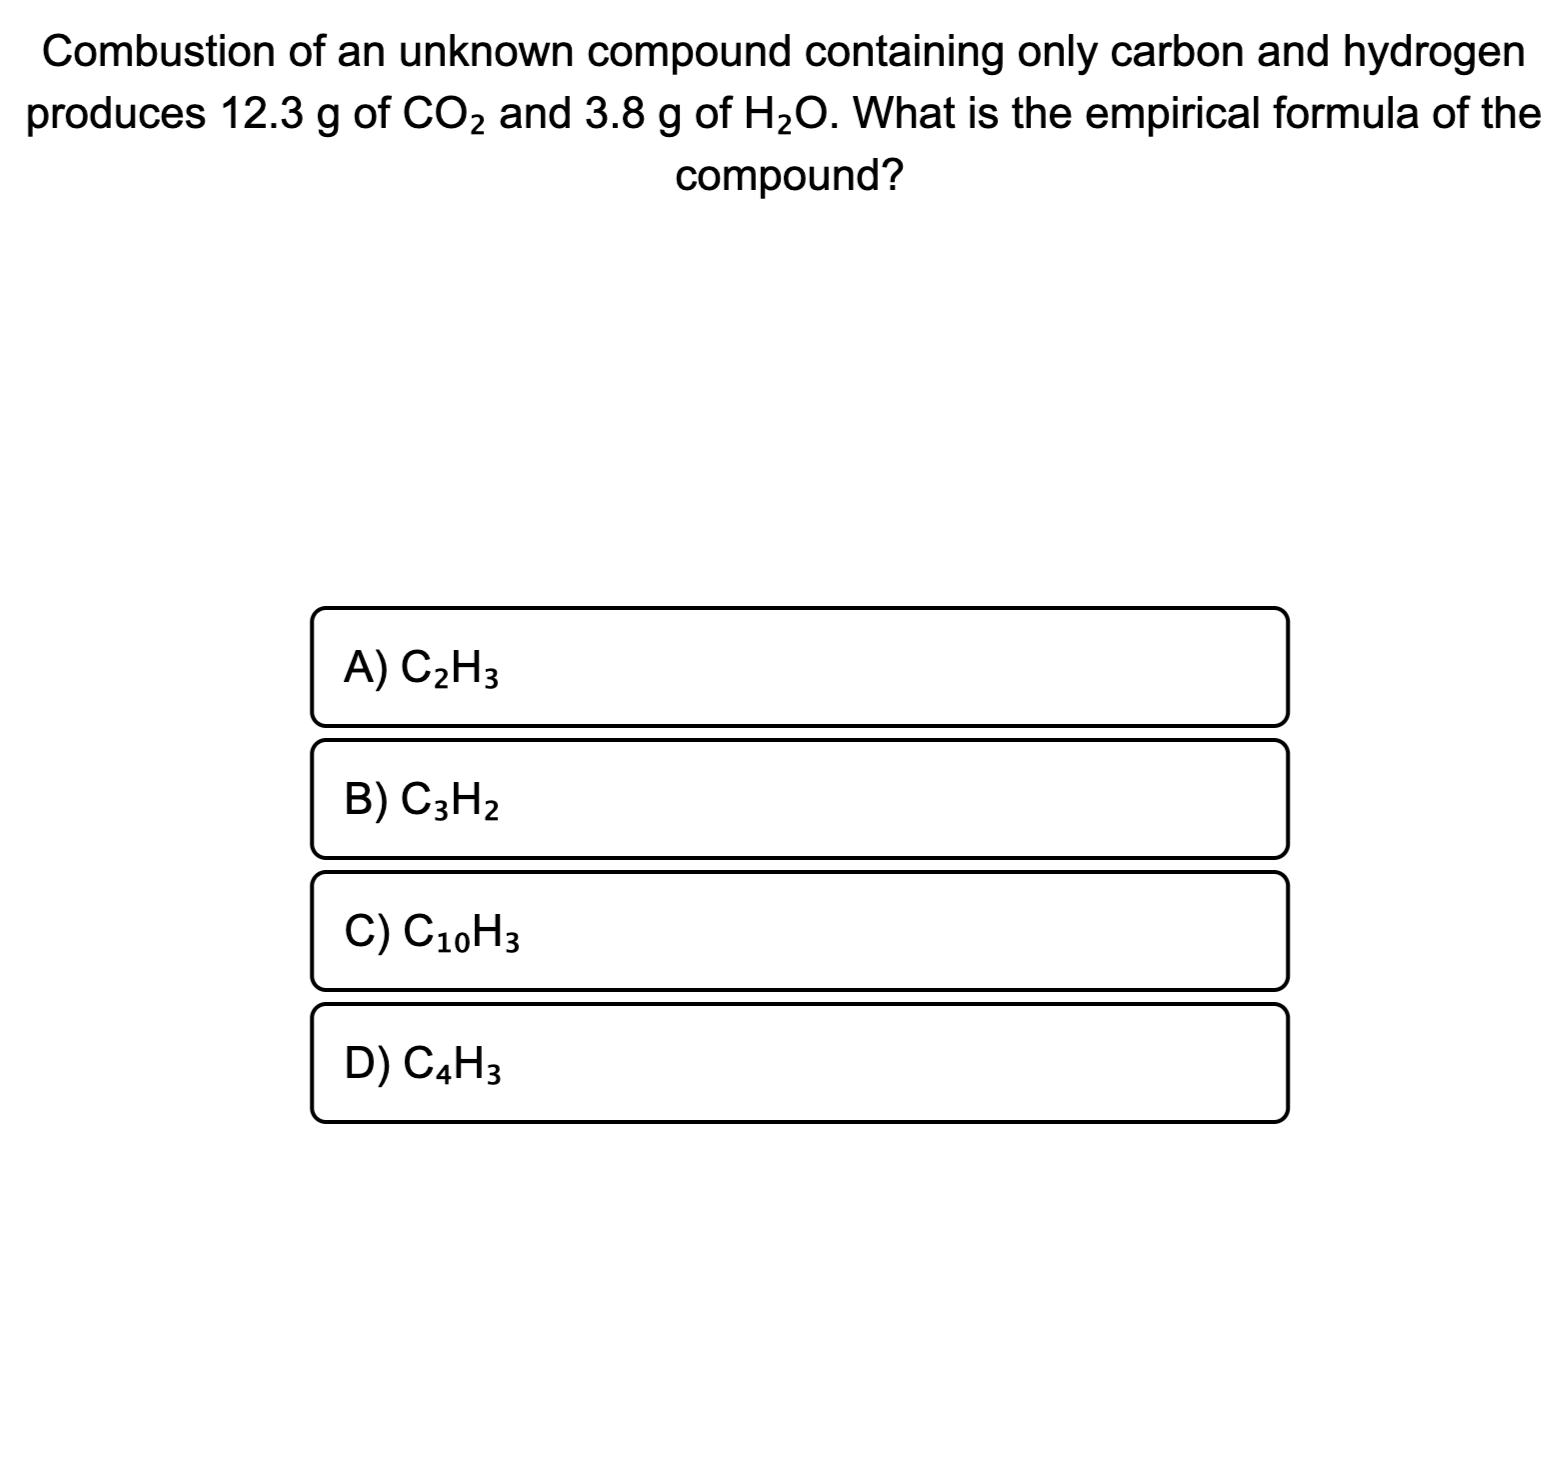 Combustion of an unknown compound containing only carbon and hydrogen
produces 12.3 g of CO2 and 3.8 g of H20. What is the empirical formula of the
compound?
A) C2H3
B) C3H2
C) C10H3
D) C4H3
